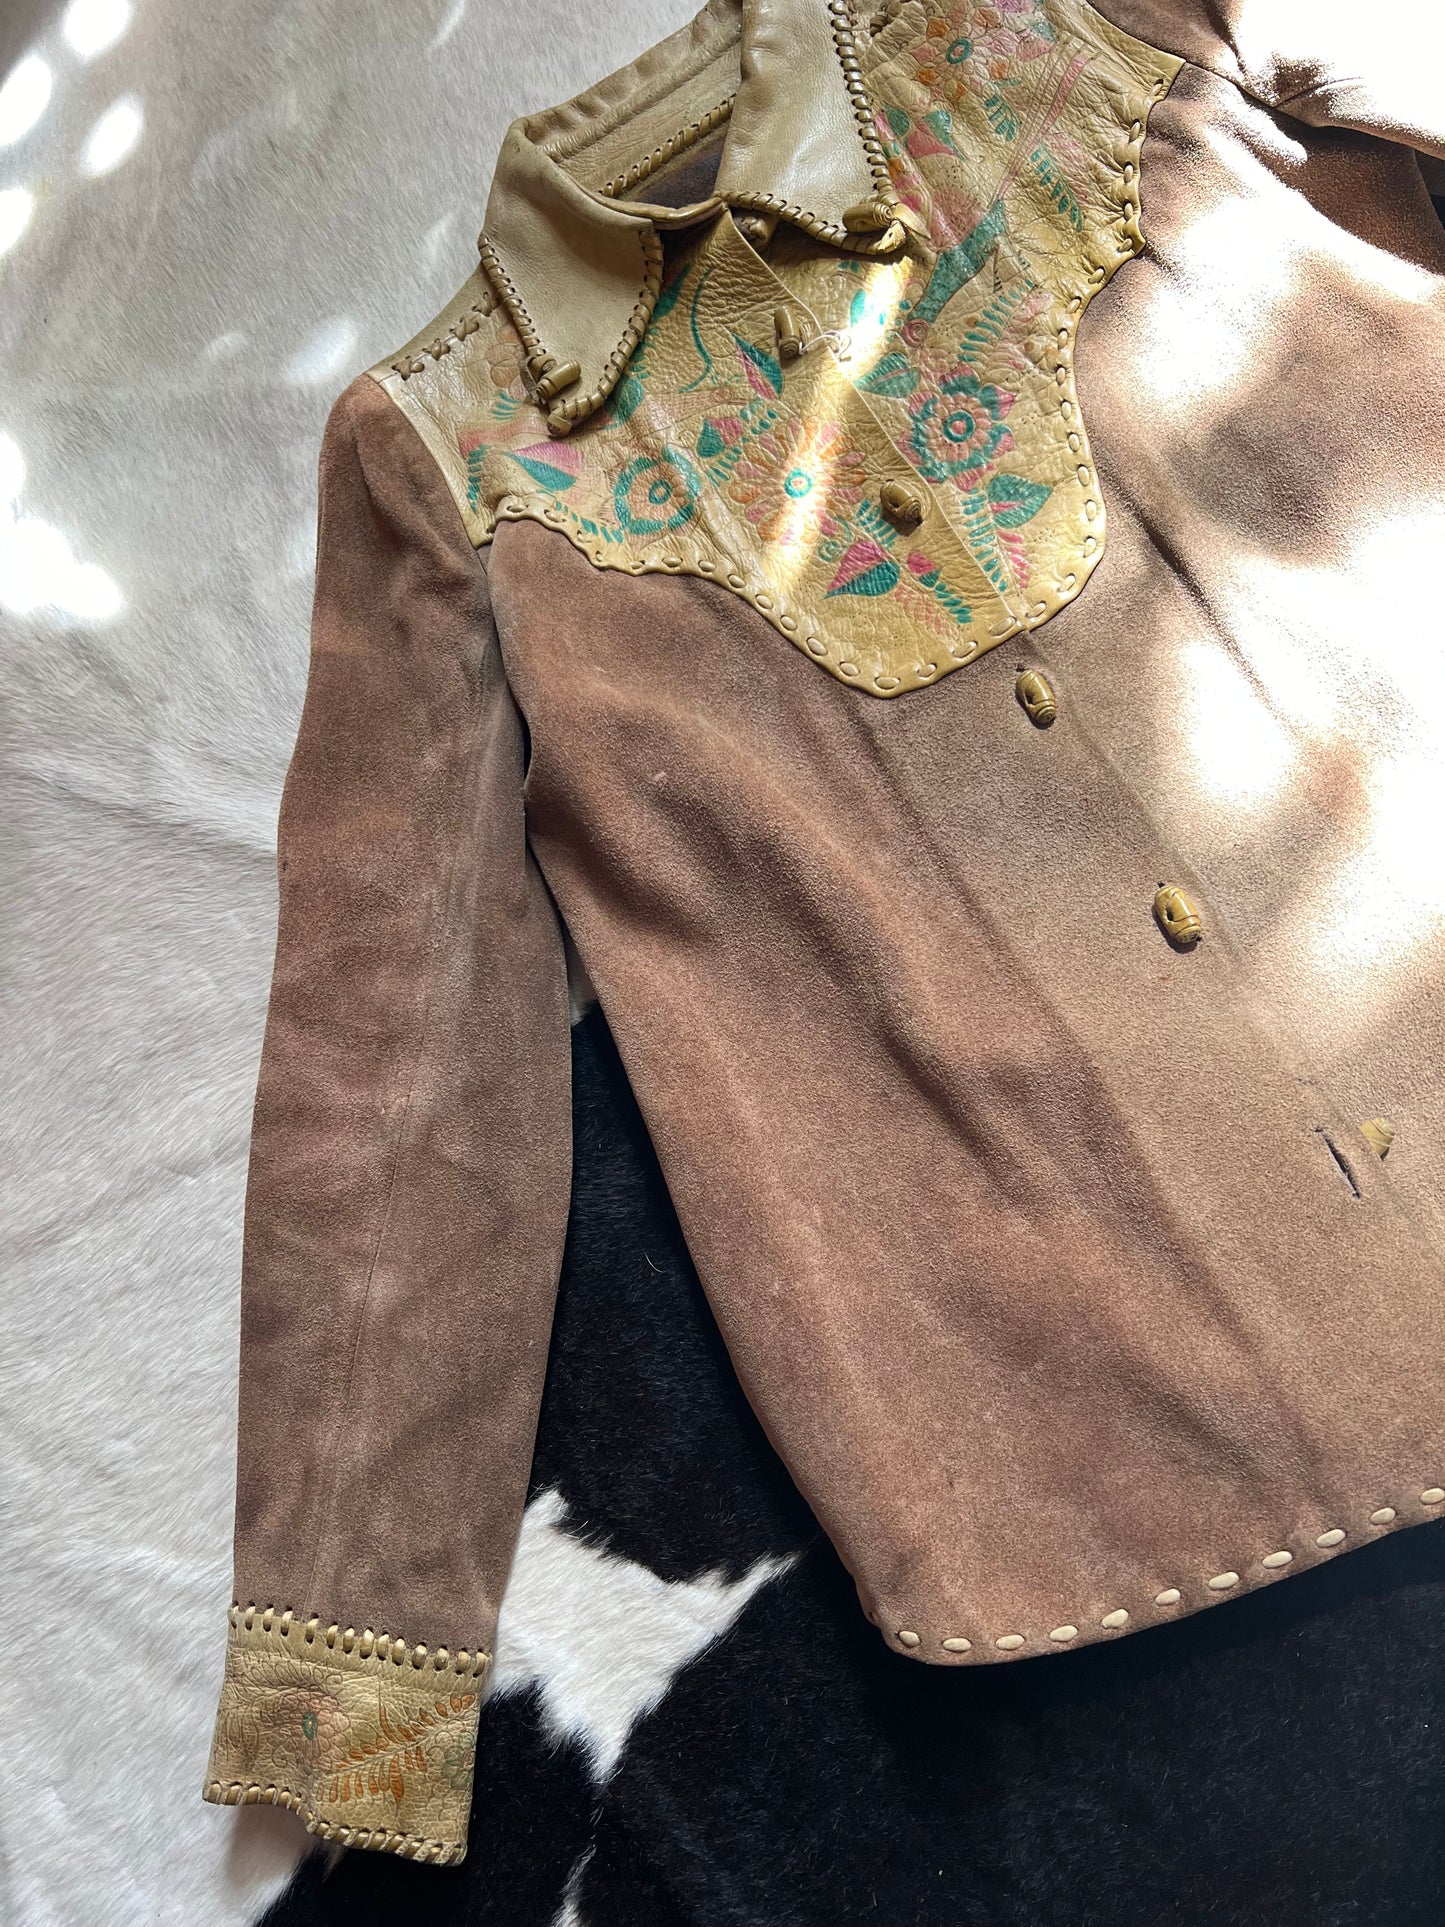 Rare 1970s CHAR suede jacket